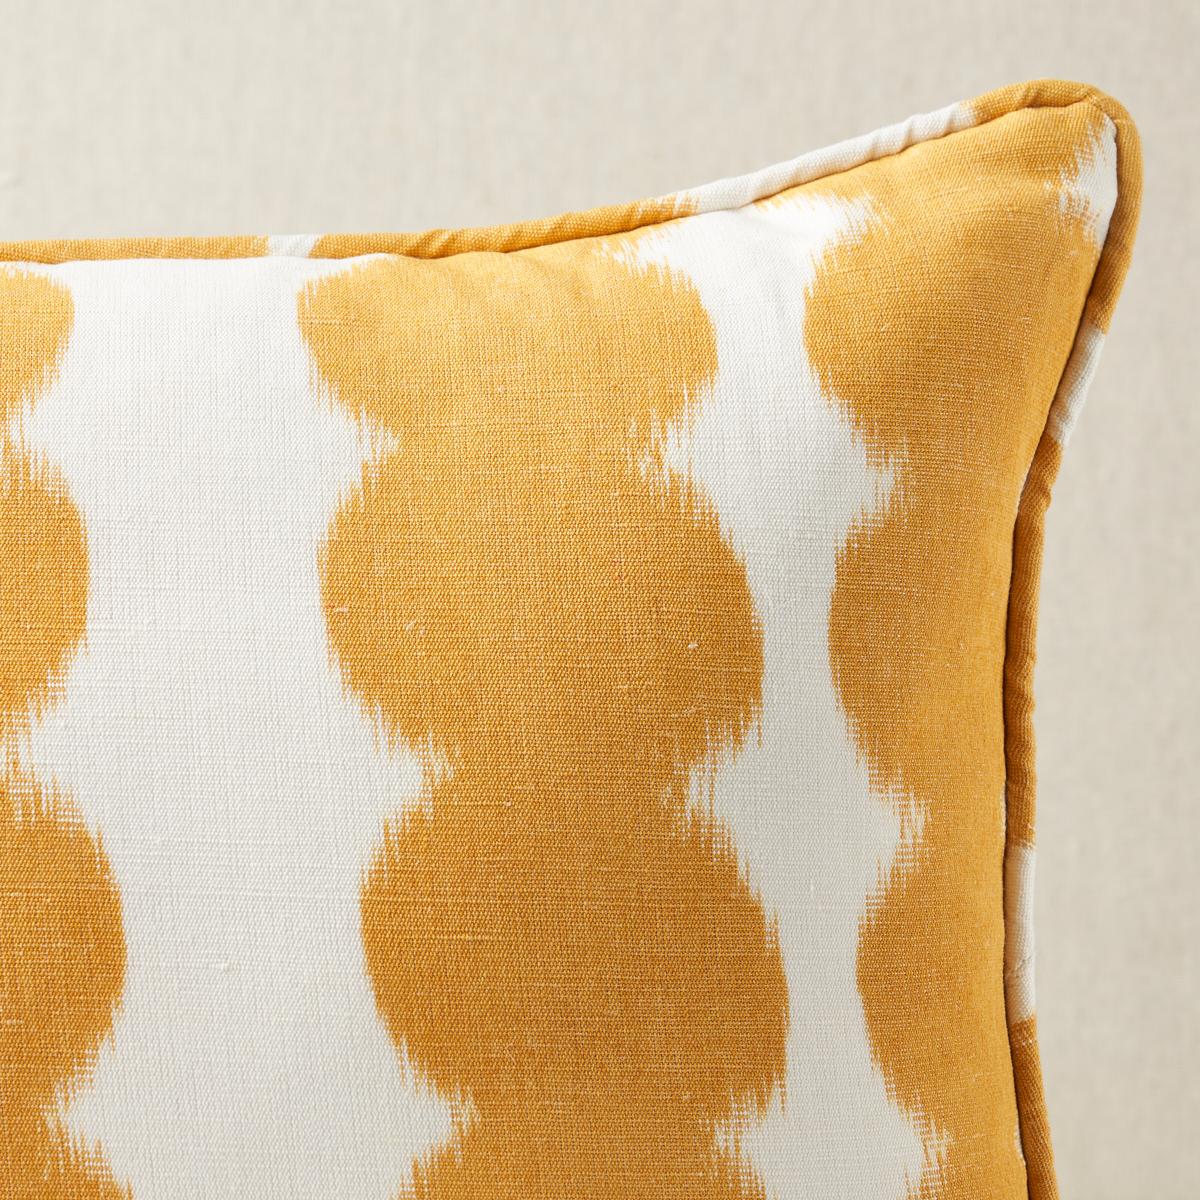 This pillow features Full Circle with a self welt finish. When an artisanal warp print meets a graphic stripe made of circles, the results are enchanting. Pillow includes a feather/down fill insert and hidden zipper closure.
